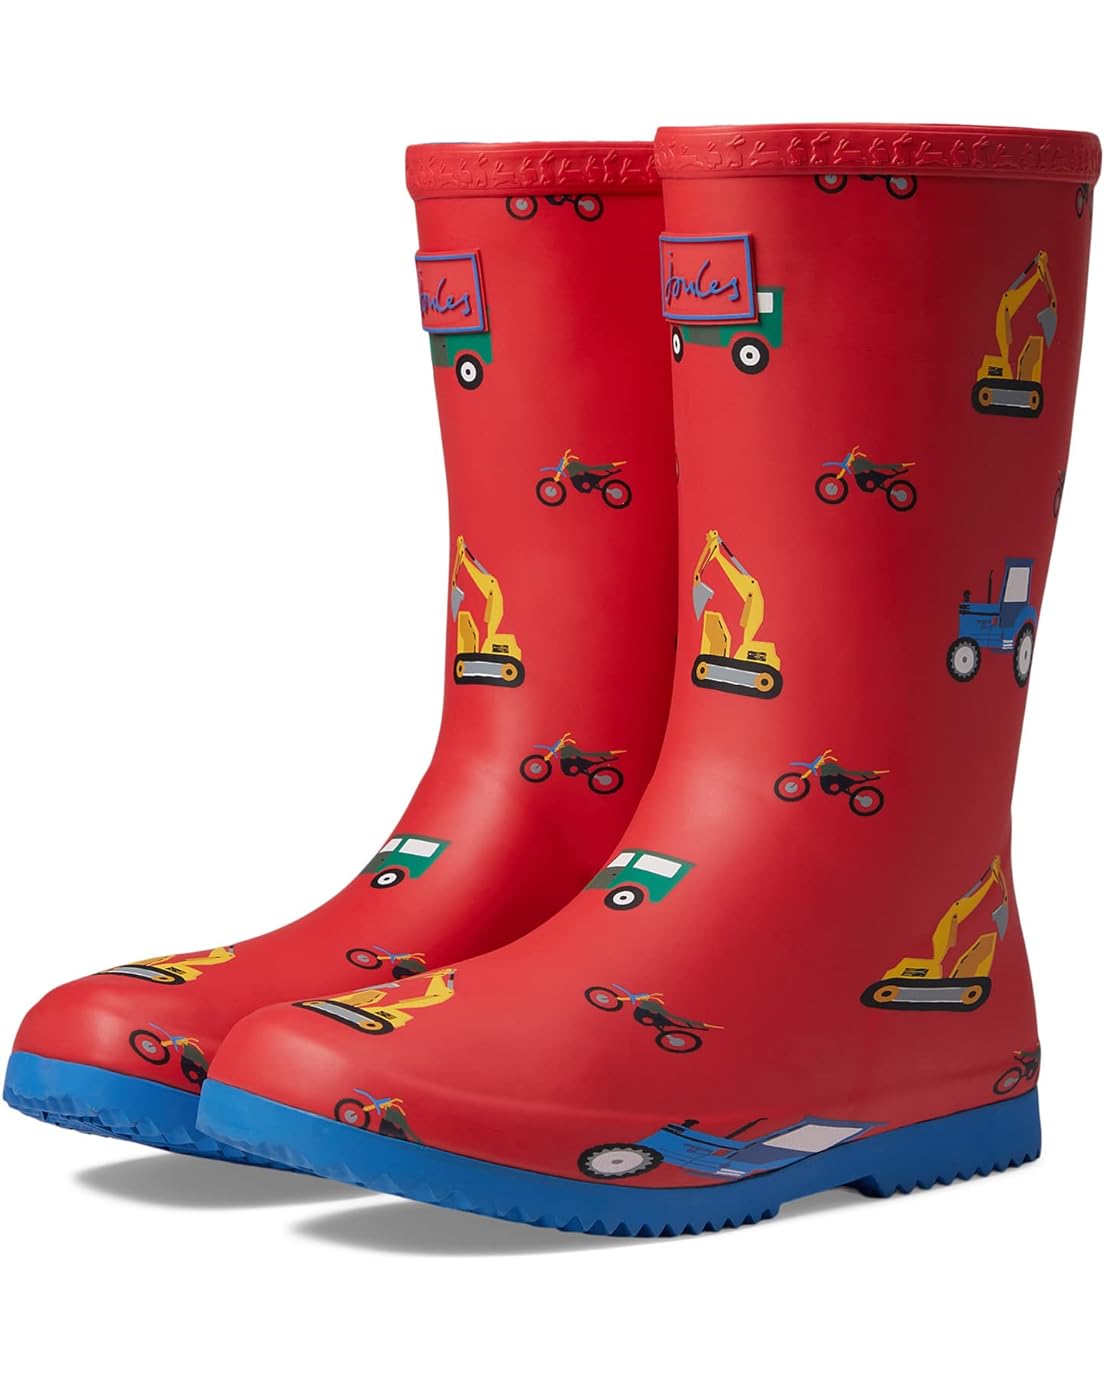 Joules Kids Roll Up Welly (Toddler/Little Kid/Big Kid)